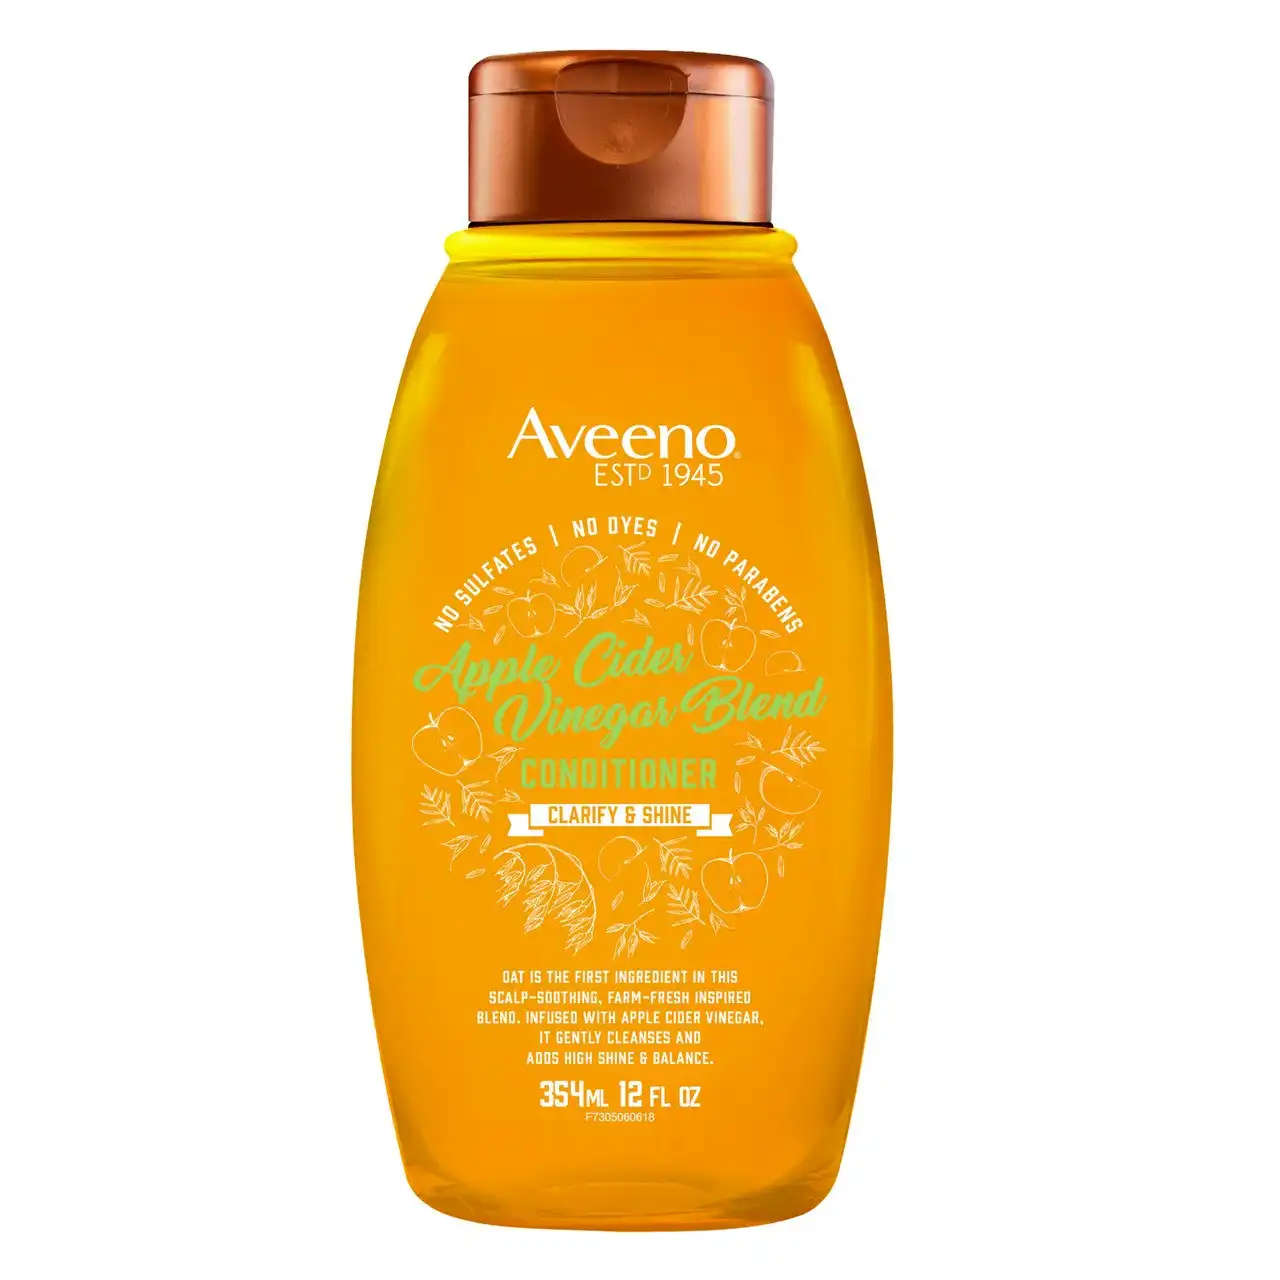 Aveeno Clarify & Shine Apple Cider Vinegar Blend Conditioner For Scalp Soothing & Gentle Cleansing 354mL